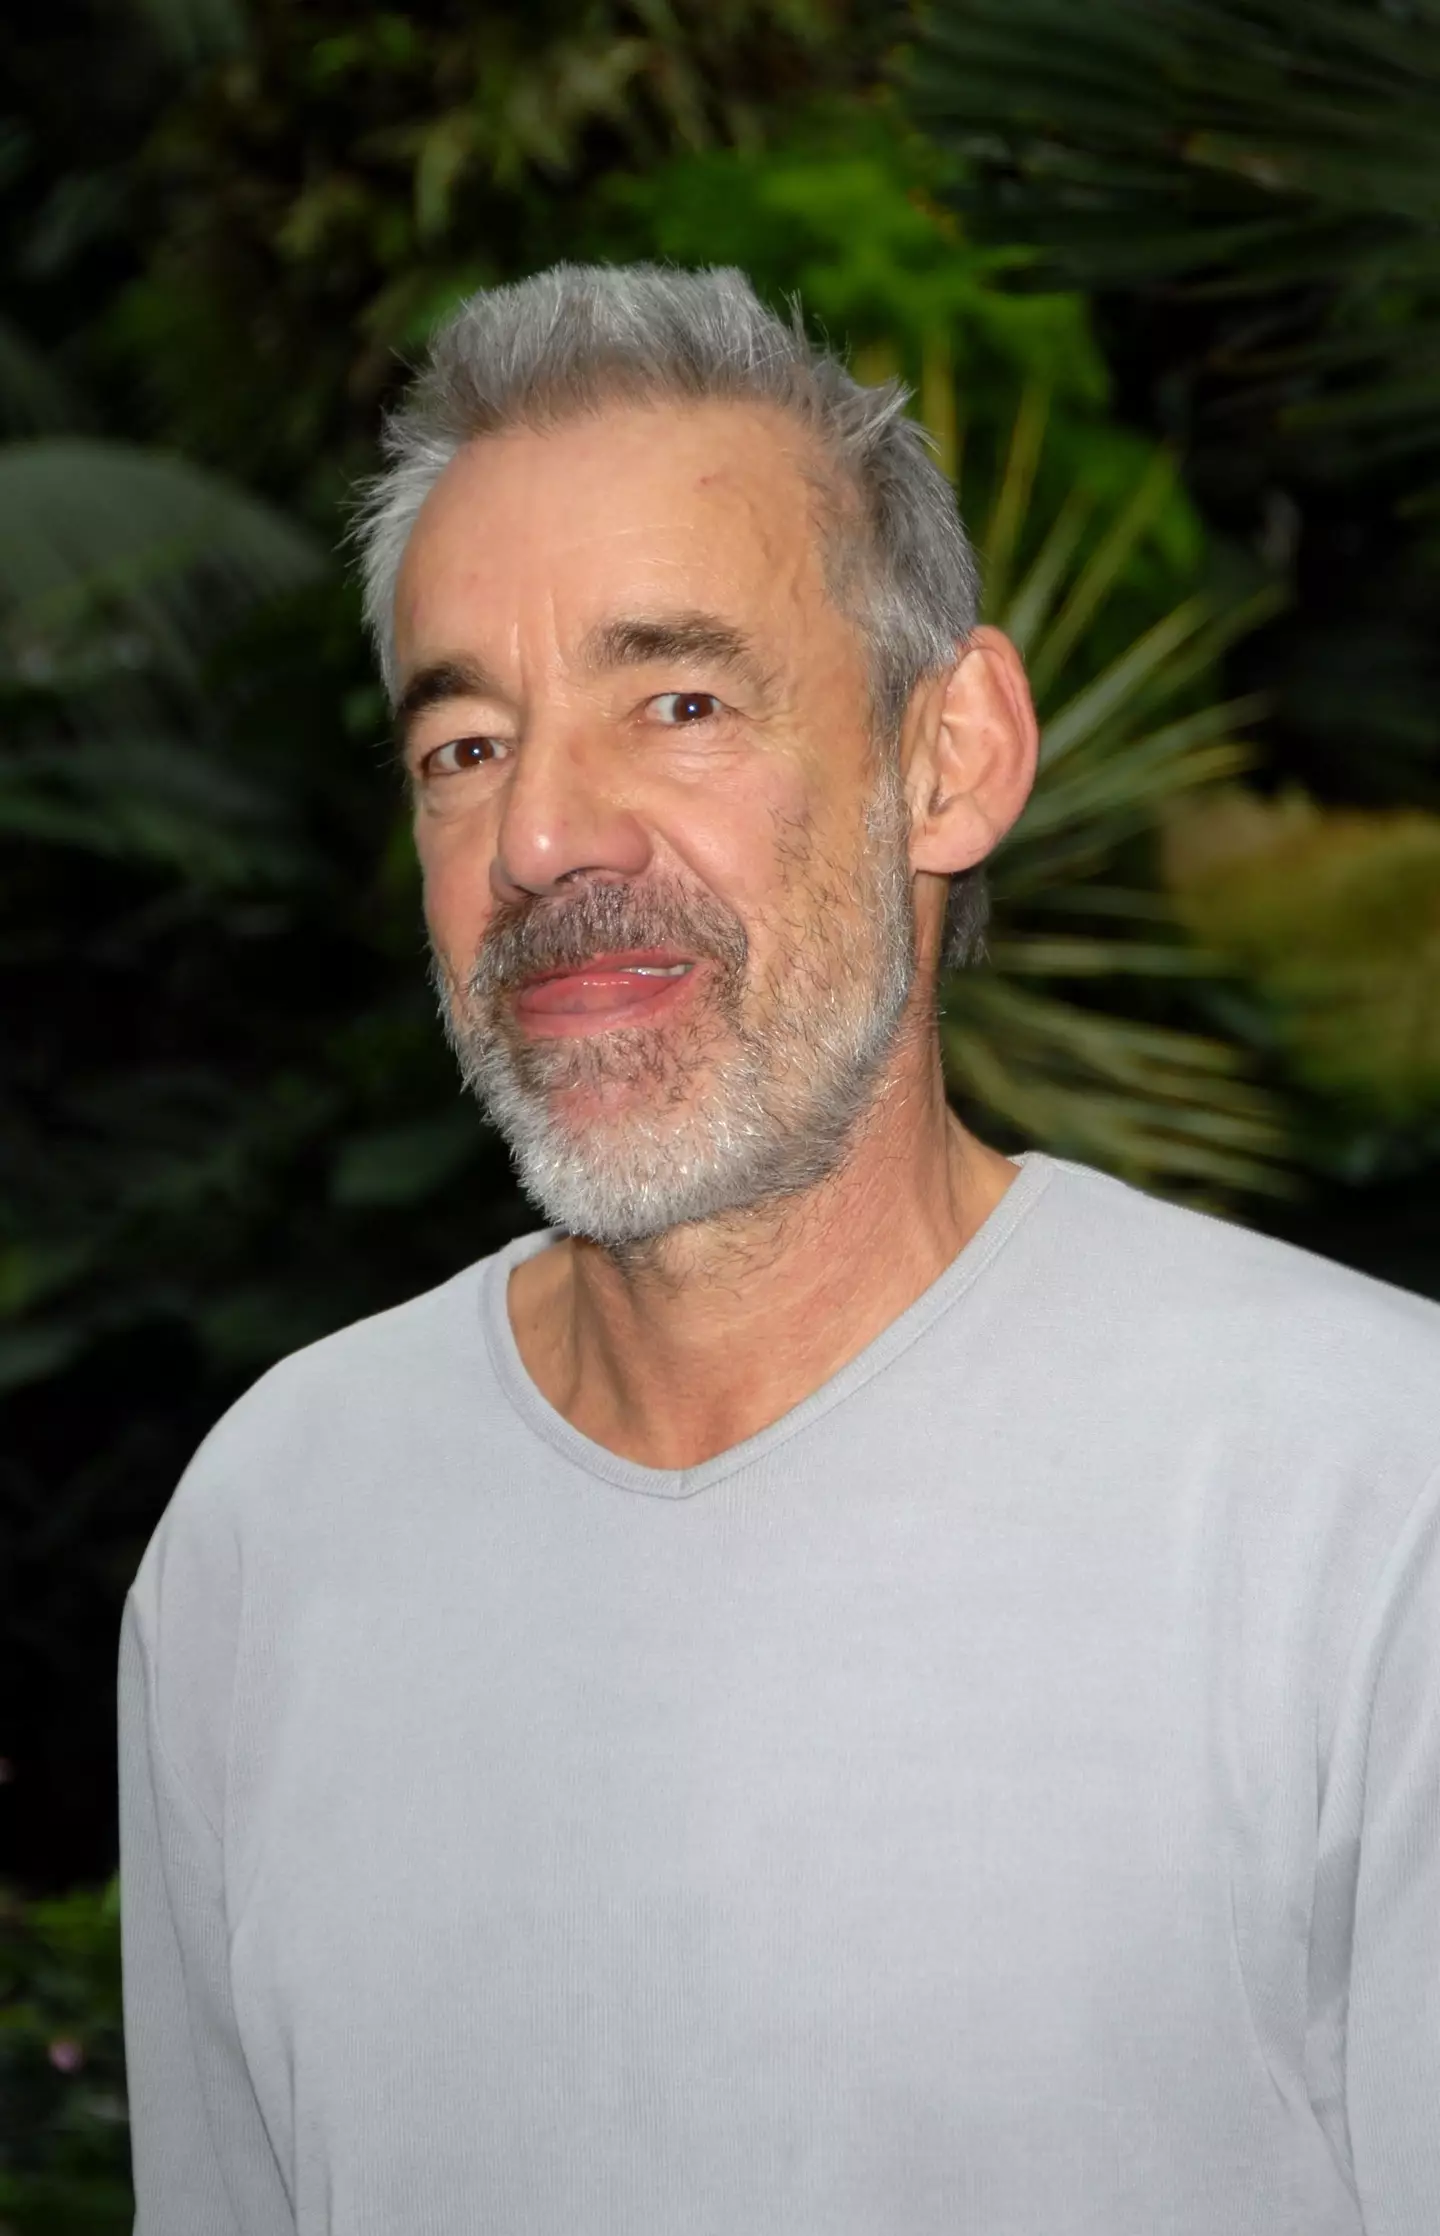 Roger Lloyd Pack was best known for his role as Trigger in Only Fools and Horses, but made a lasting impression on the HP franchise. (Martin Doyle/FilmMagic)